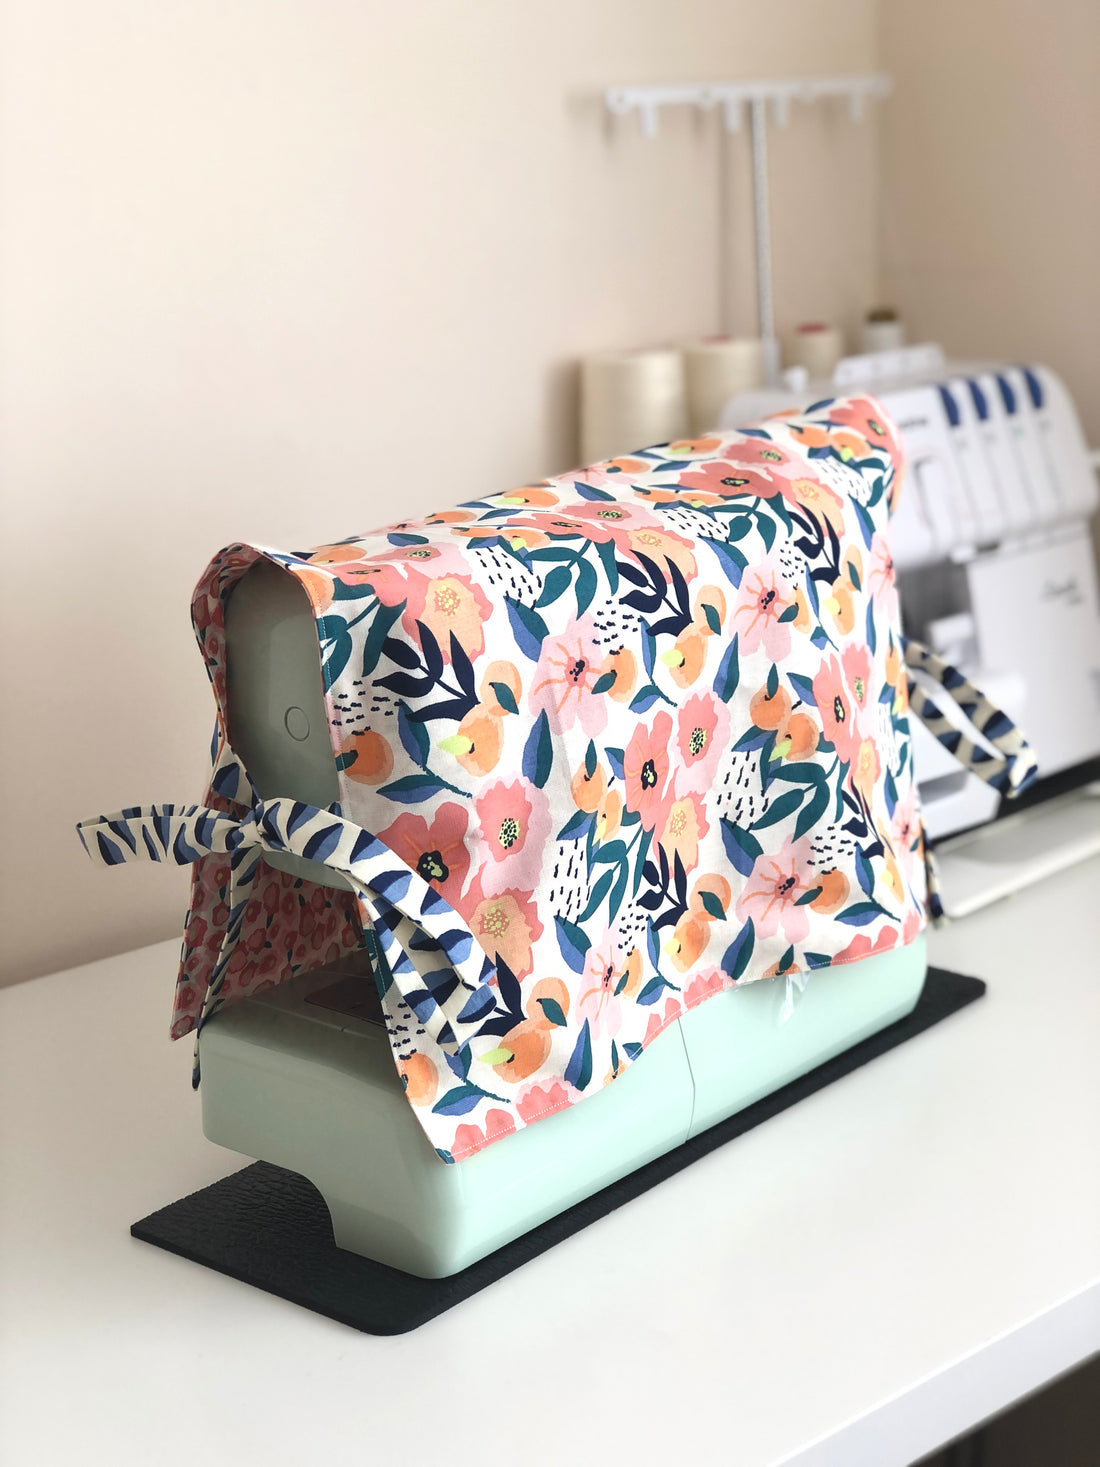 Fat Quarter Project - Sewing Machine Dust Cover – Stitch and Ink